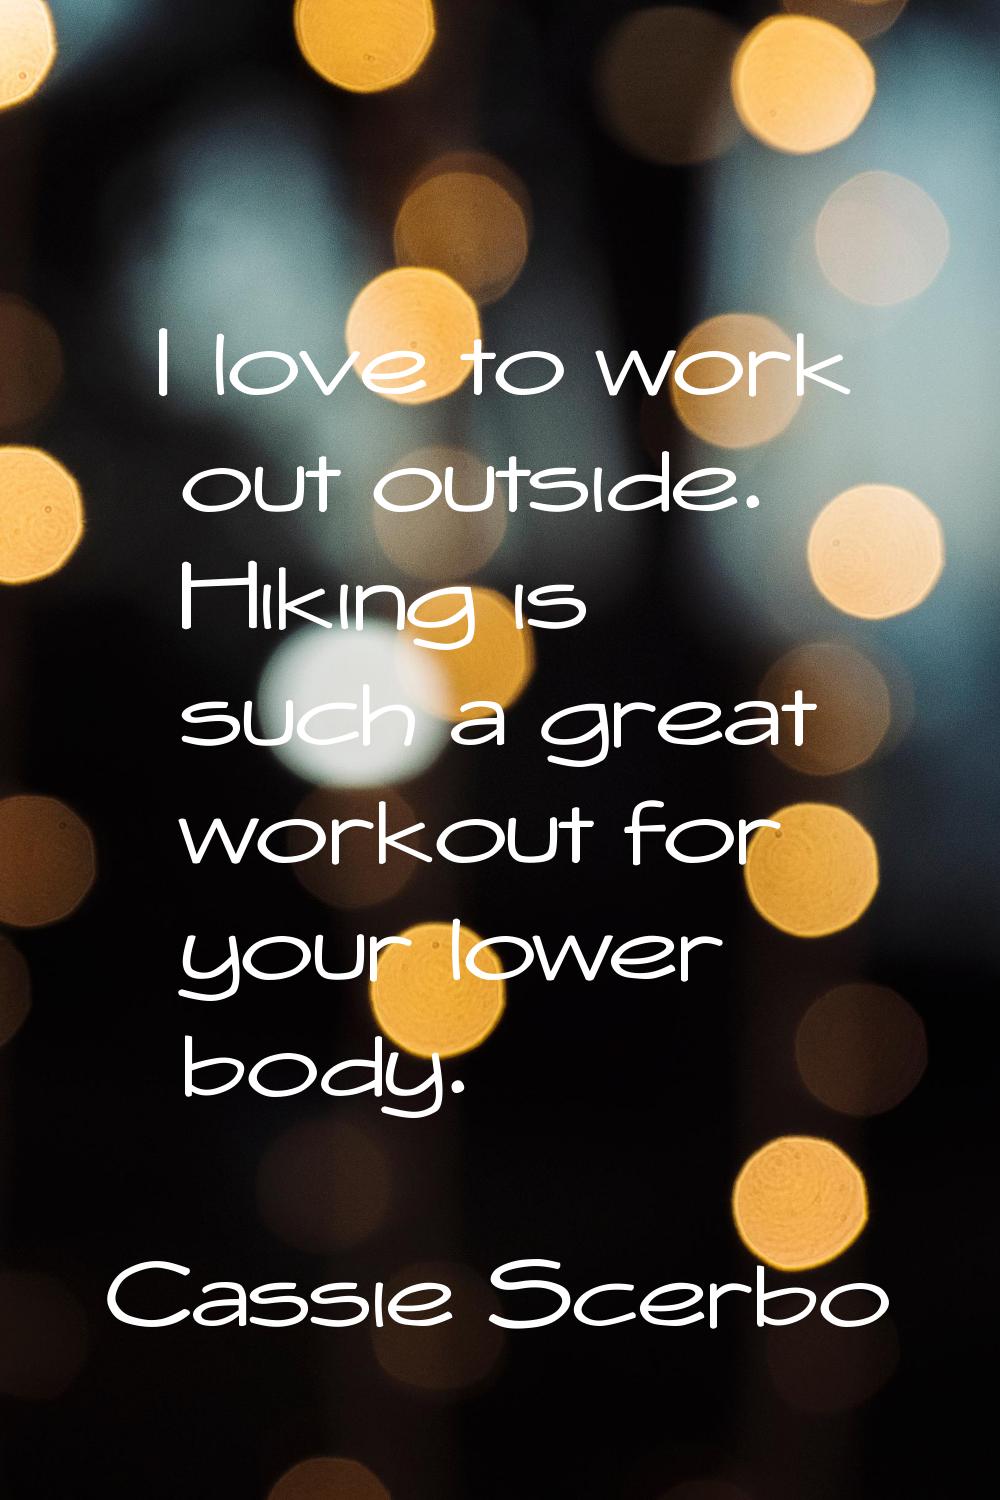 I love to work out outside. Hiking is such a great workout for your lower body.